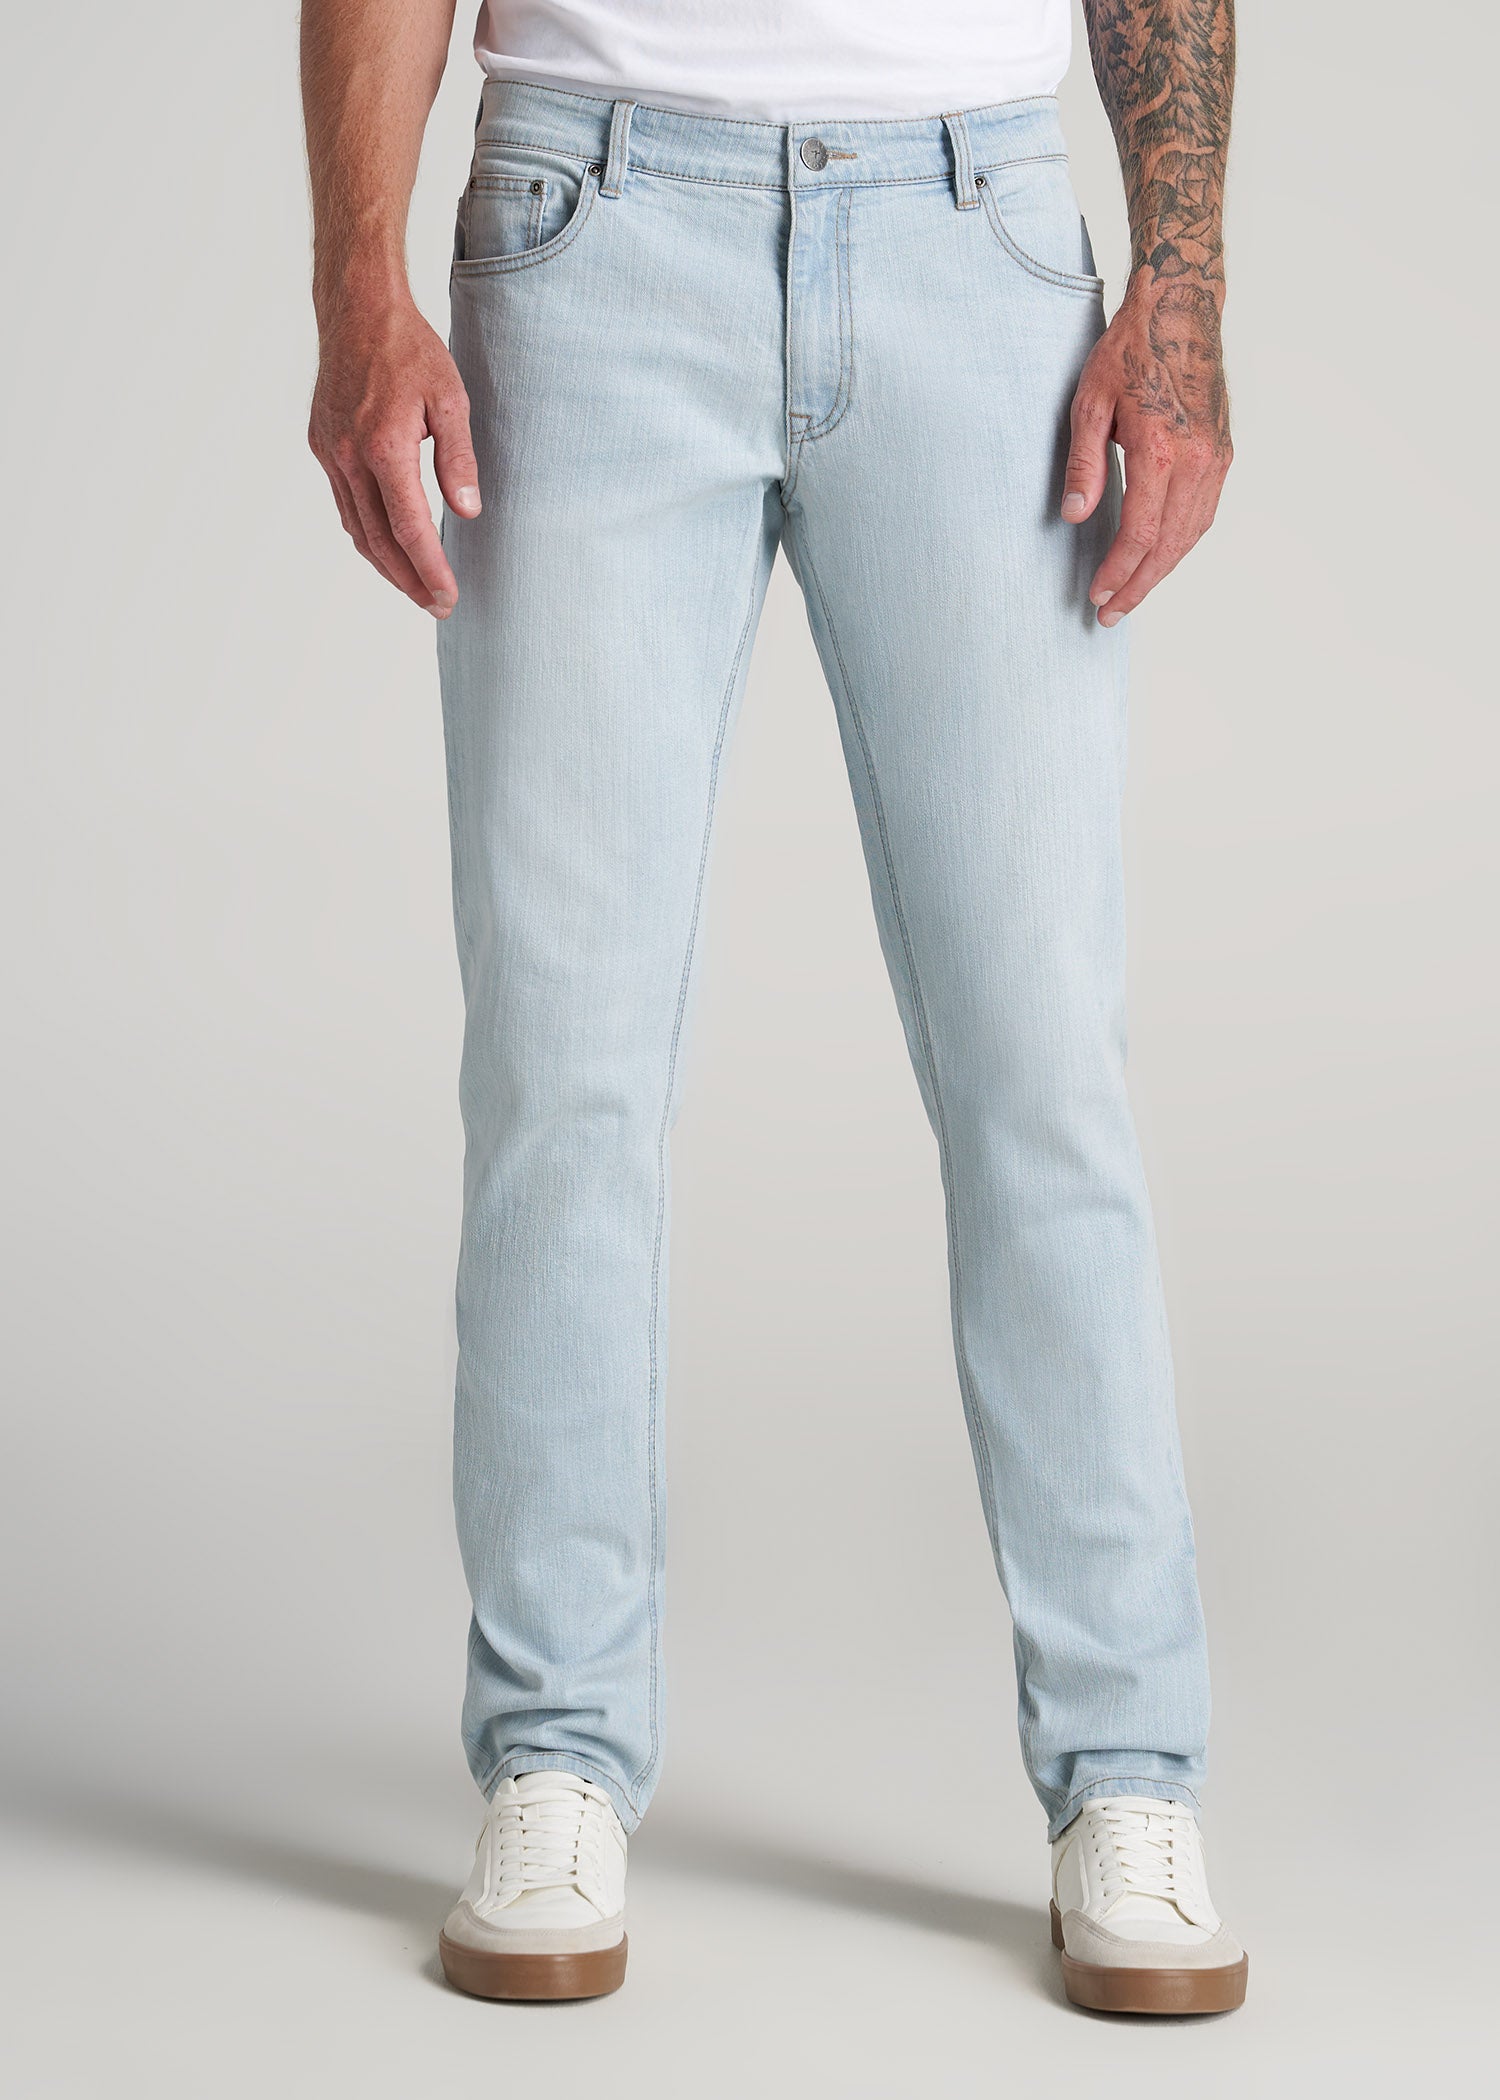 Carman TAPERED Jeans for Tall Men in California Blue